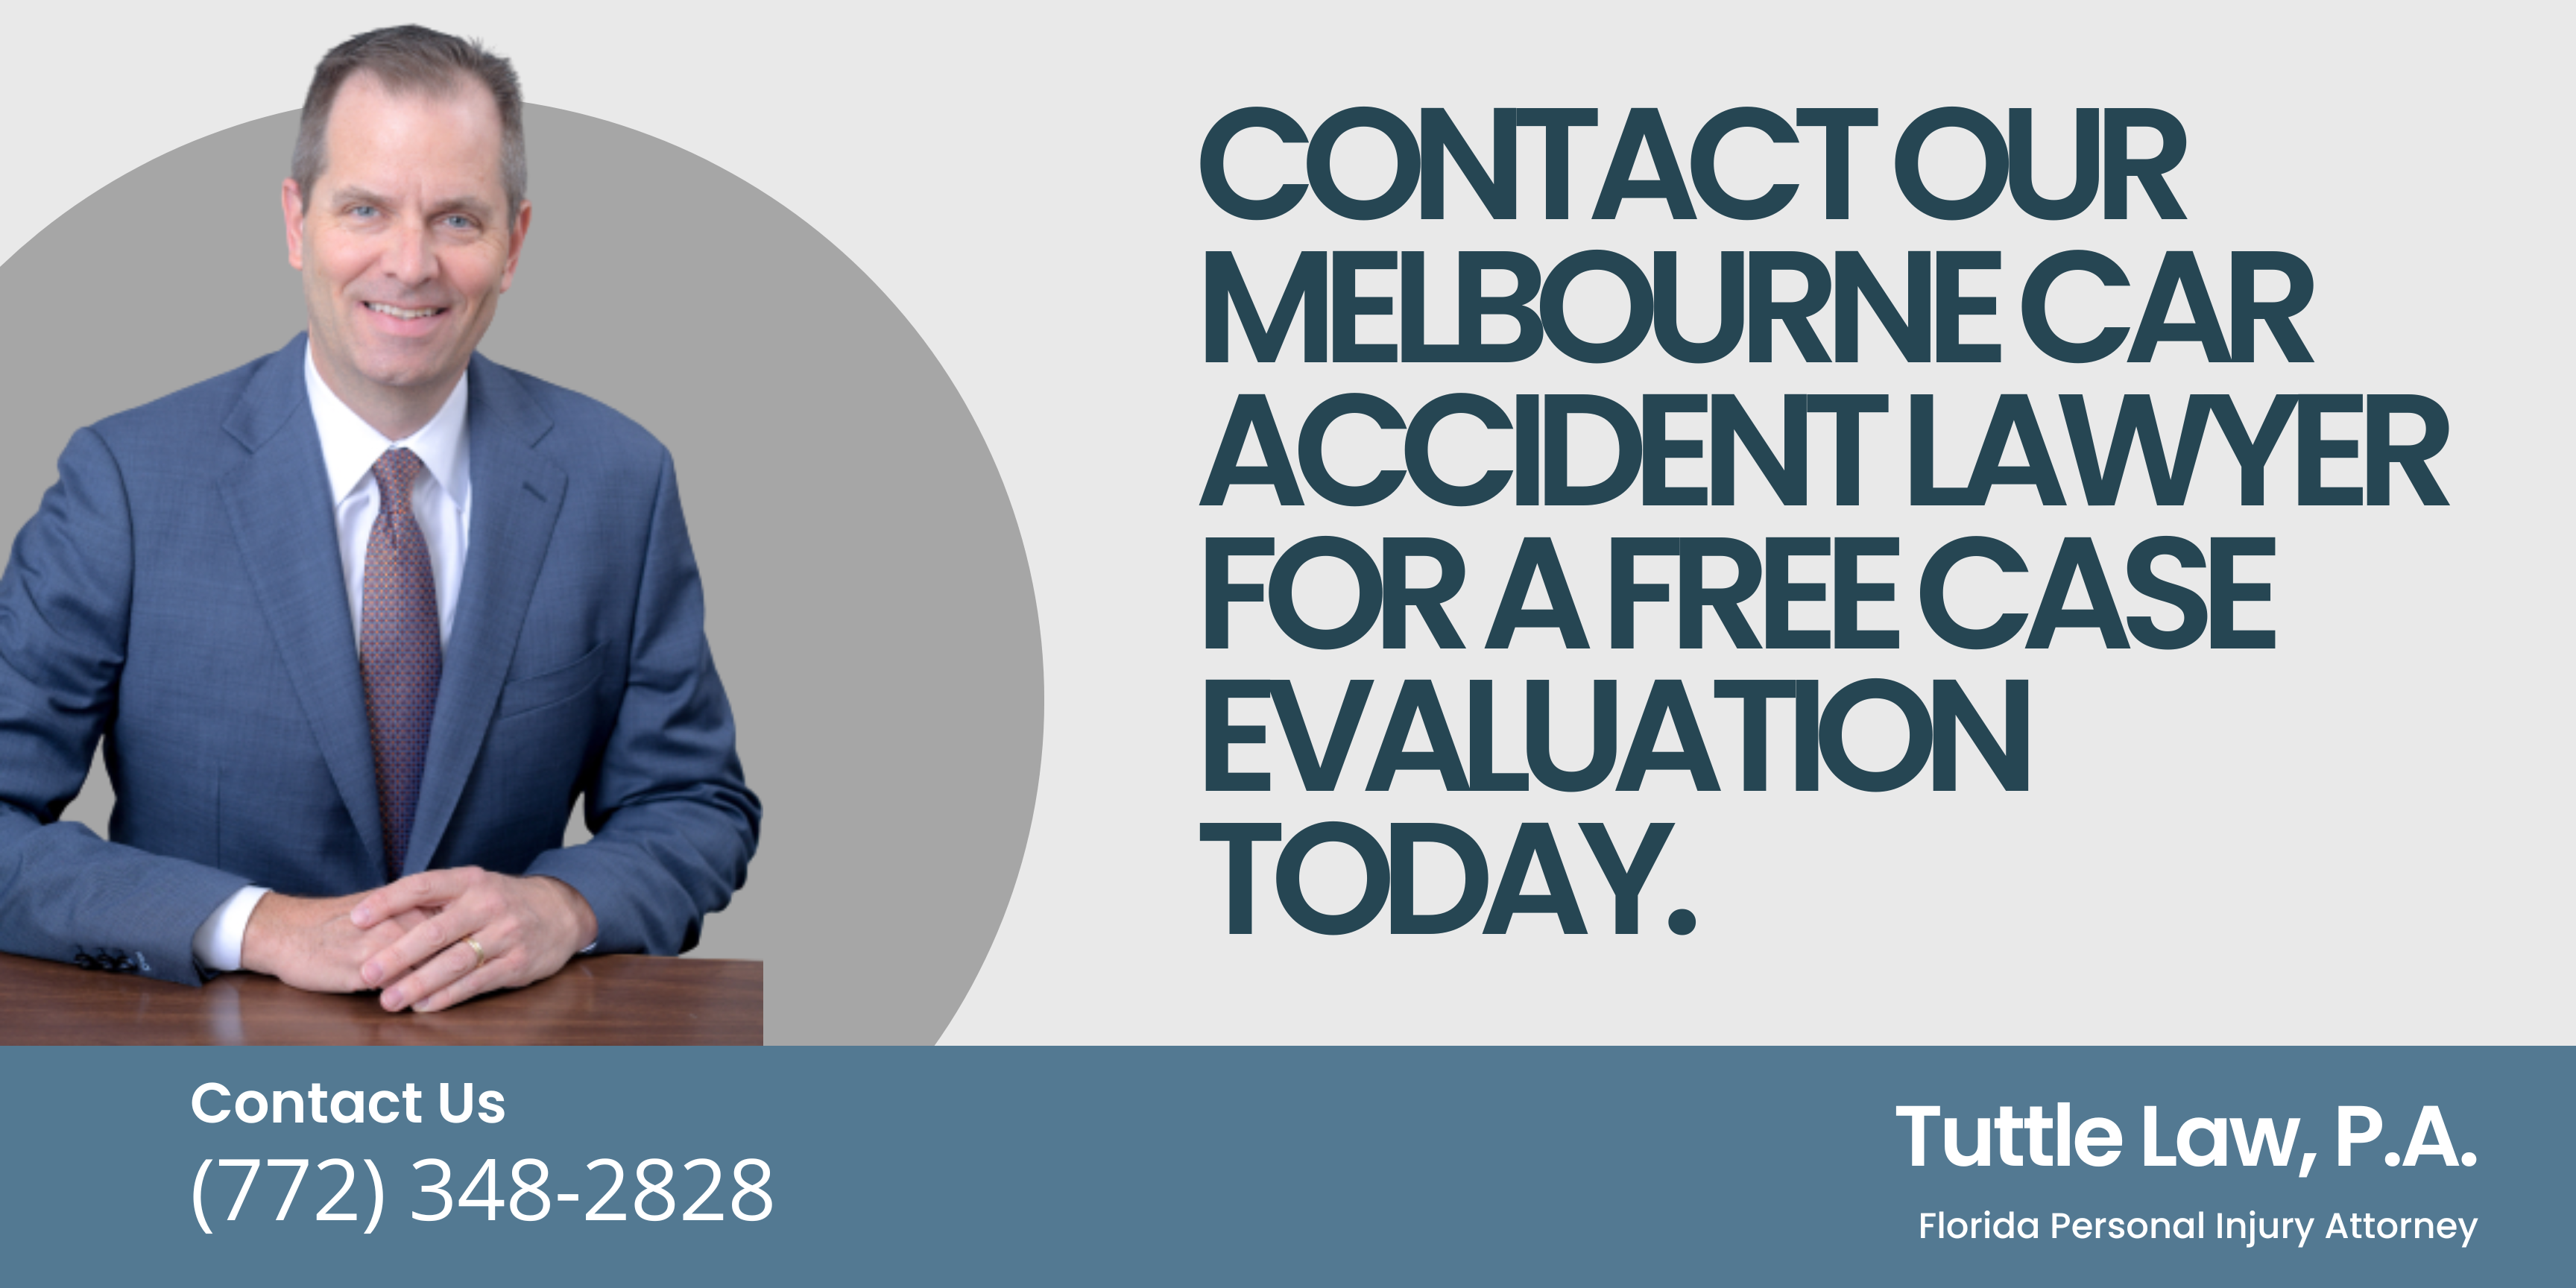 Contact our Melbourne Car Accident Lawyer